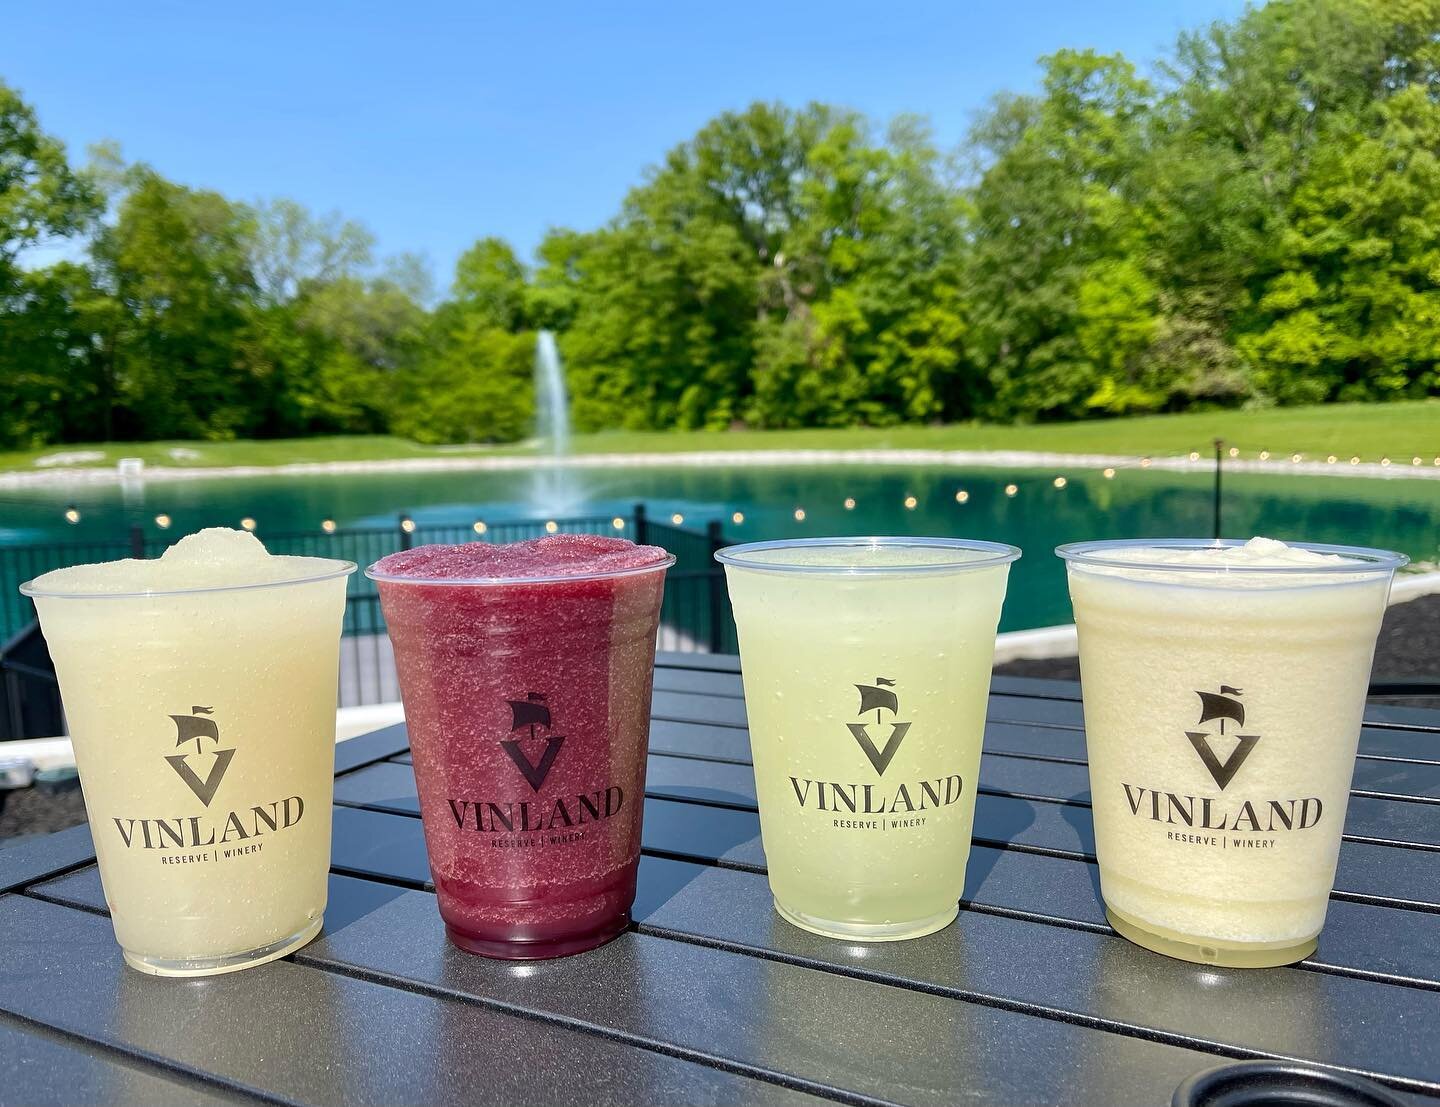 ☀️ JUST IN TIME FOR SUMMER 😎

💕 Here is our slushie lineup!

From left to right:

🤍 Niagara White Wine Slushie

❤️ Concord Red Wine Slushie

💚 Margarita Slushie

🧡 Pineapple Breeze Slushie 

✨ COME TRY ONE TODAY! ✨

&bull;
&bull;
&bull;

#vinlan